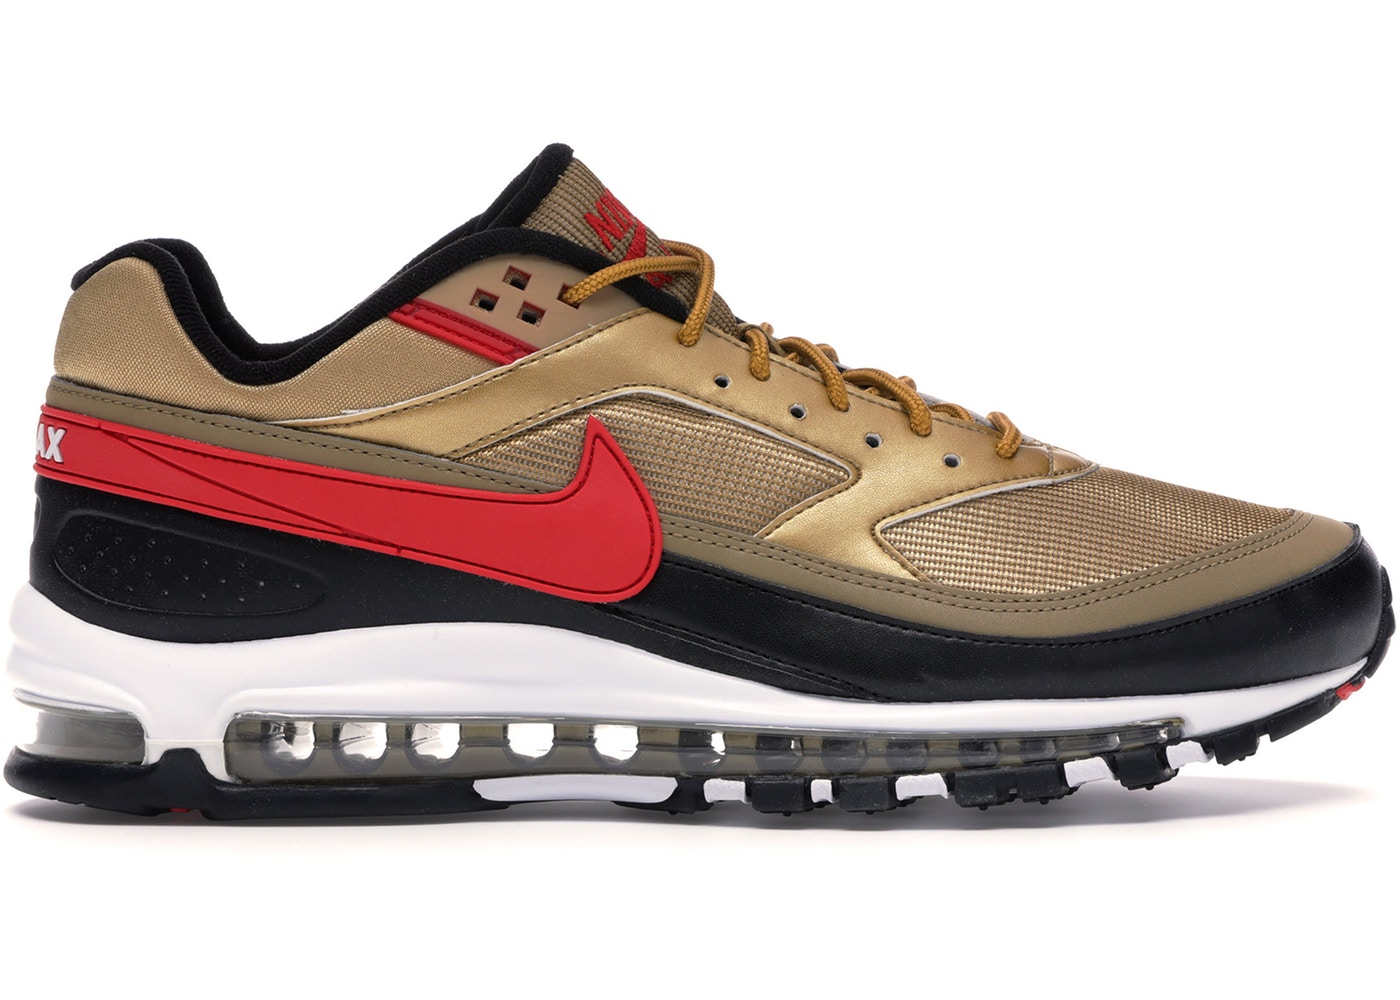 gold and red air max